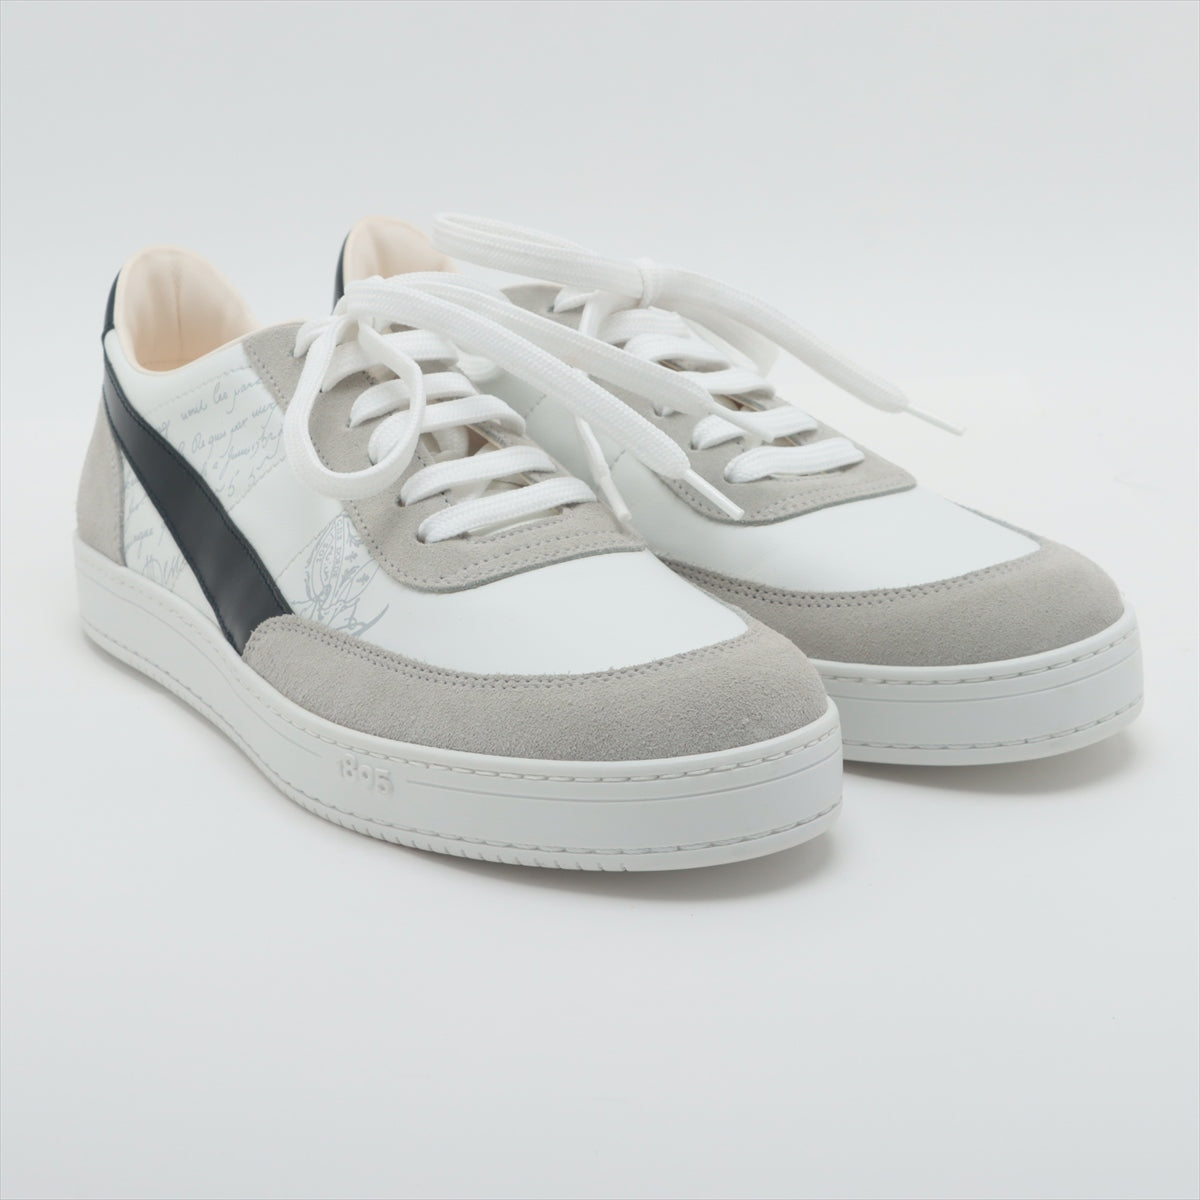 Berluti playtime Leather & Suede Sneakers 8.5 Men's Gray x white Calligraphy box There is a storage bag